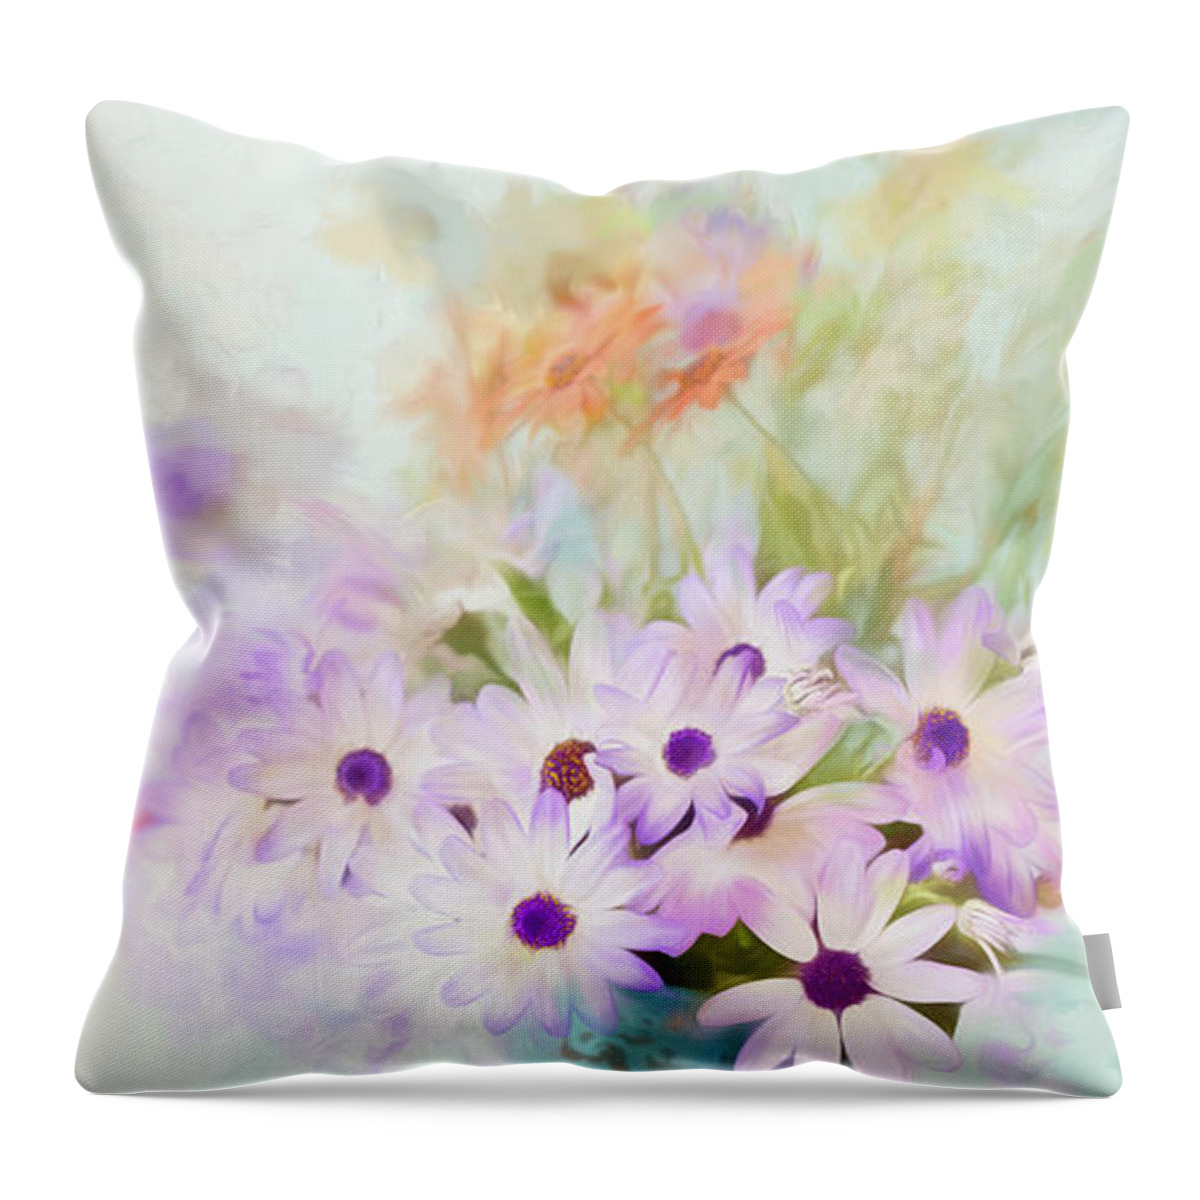 Wildflowers Throw Pillow featuring the photograph Painterly Spring Daisy Bouquet by Susan Gary